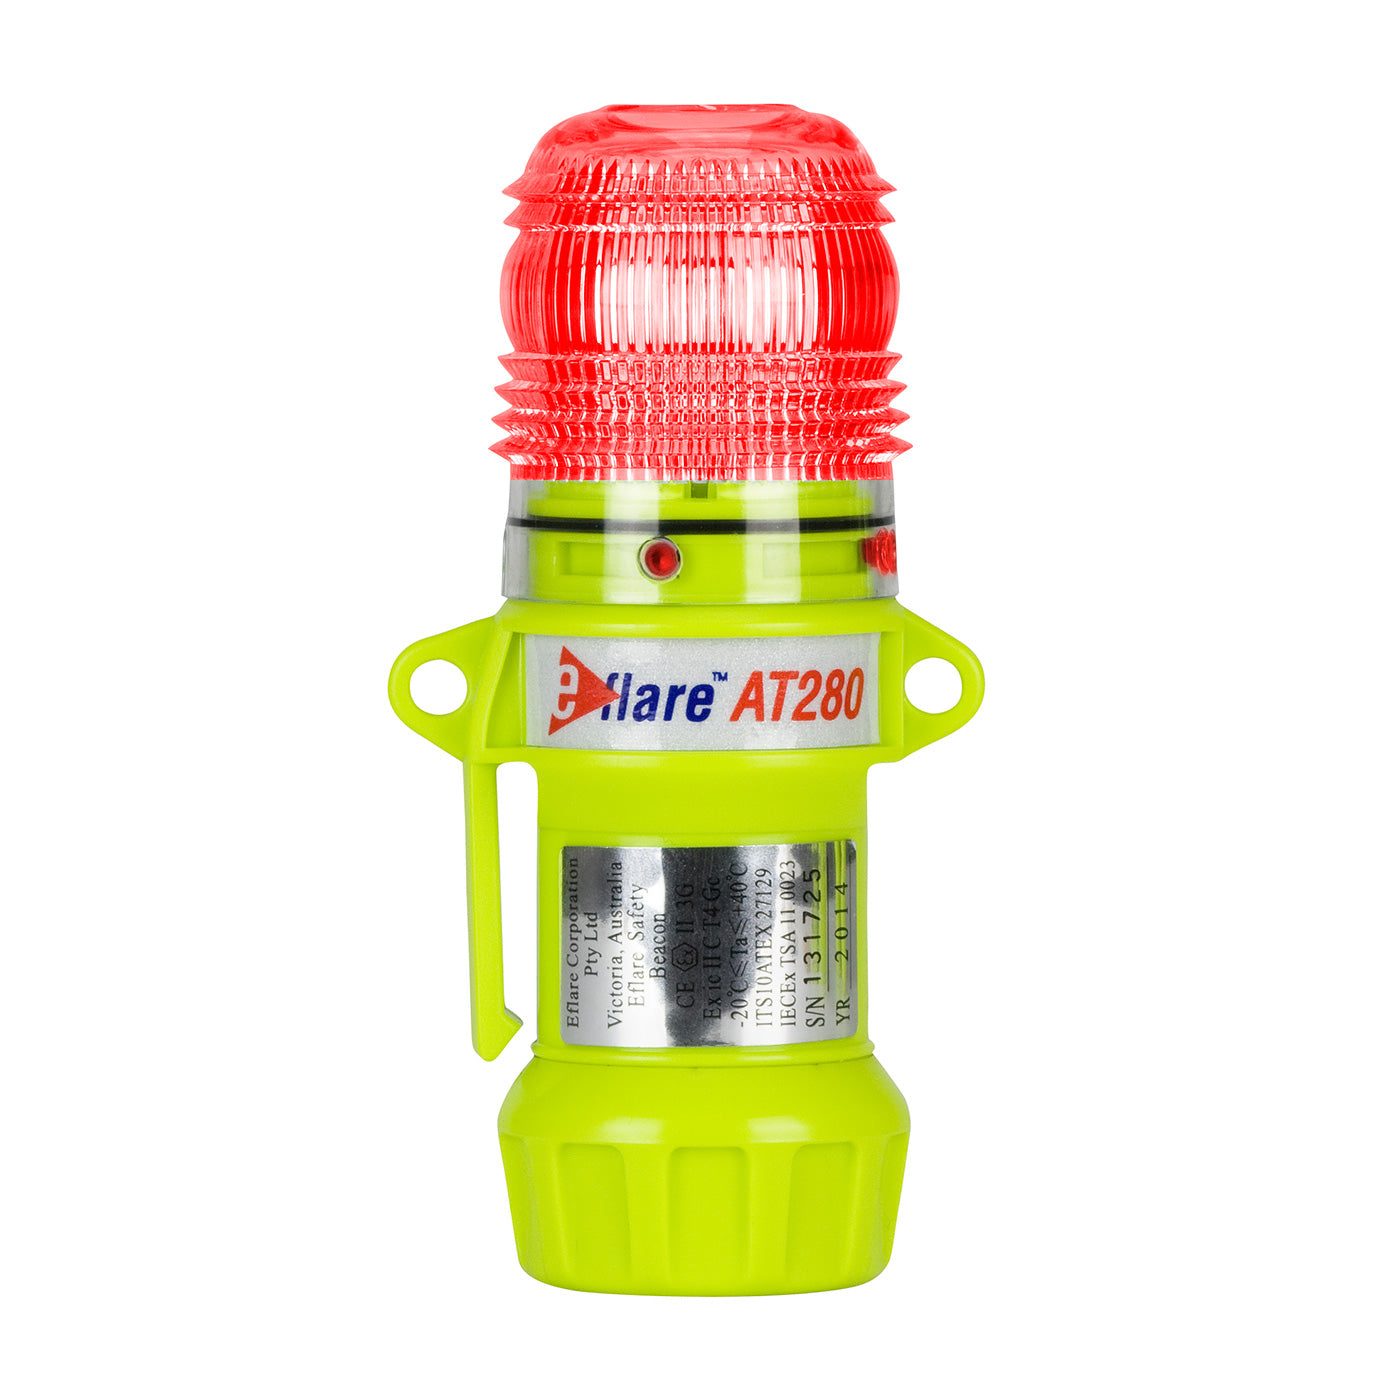 Protective Industrial Products-E-FLARE COMPACT SAFETY & EMERGENCY BEACON-eSafety Supplies, Inc